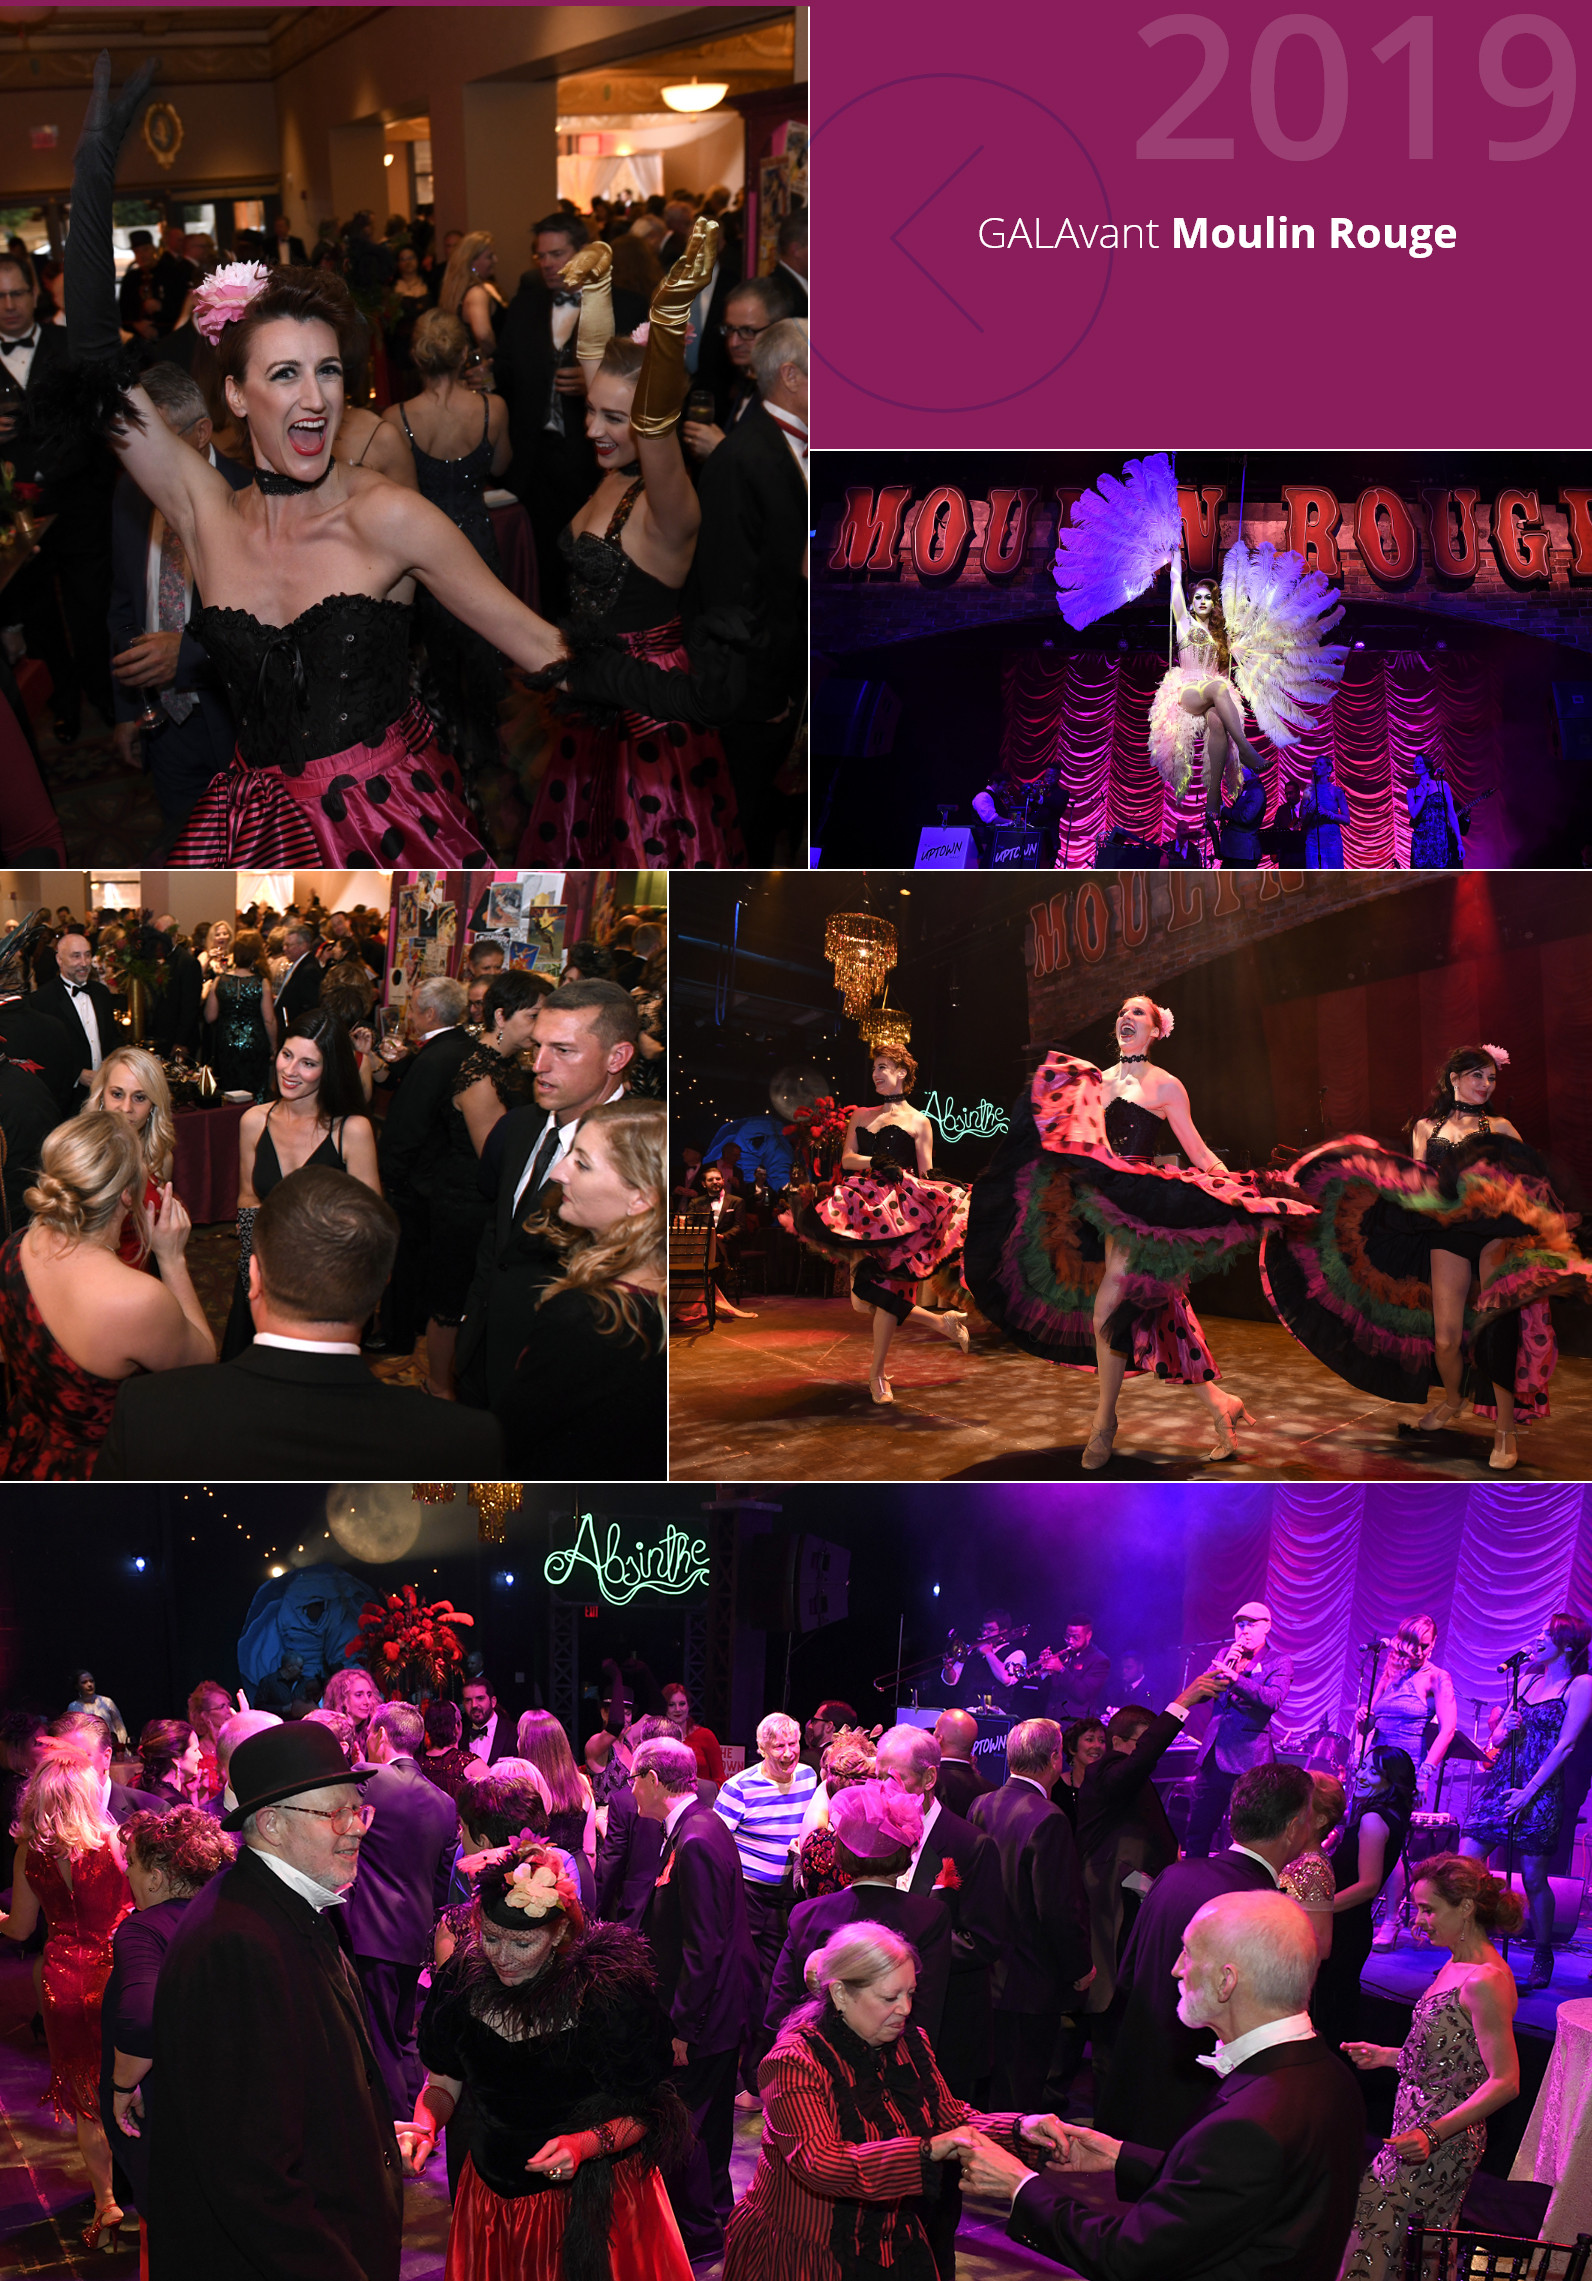 Collage of photos from 2019 Gala "Moulin Rouge"